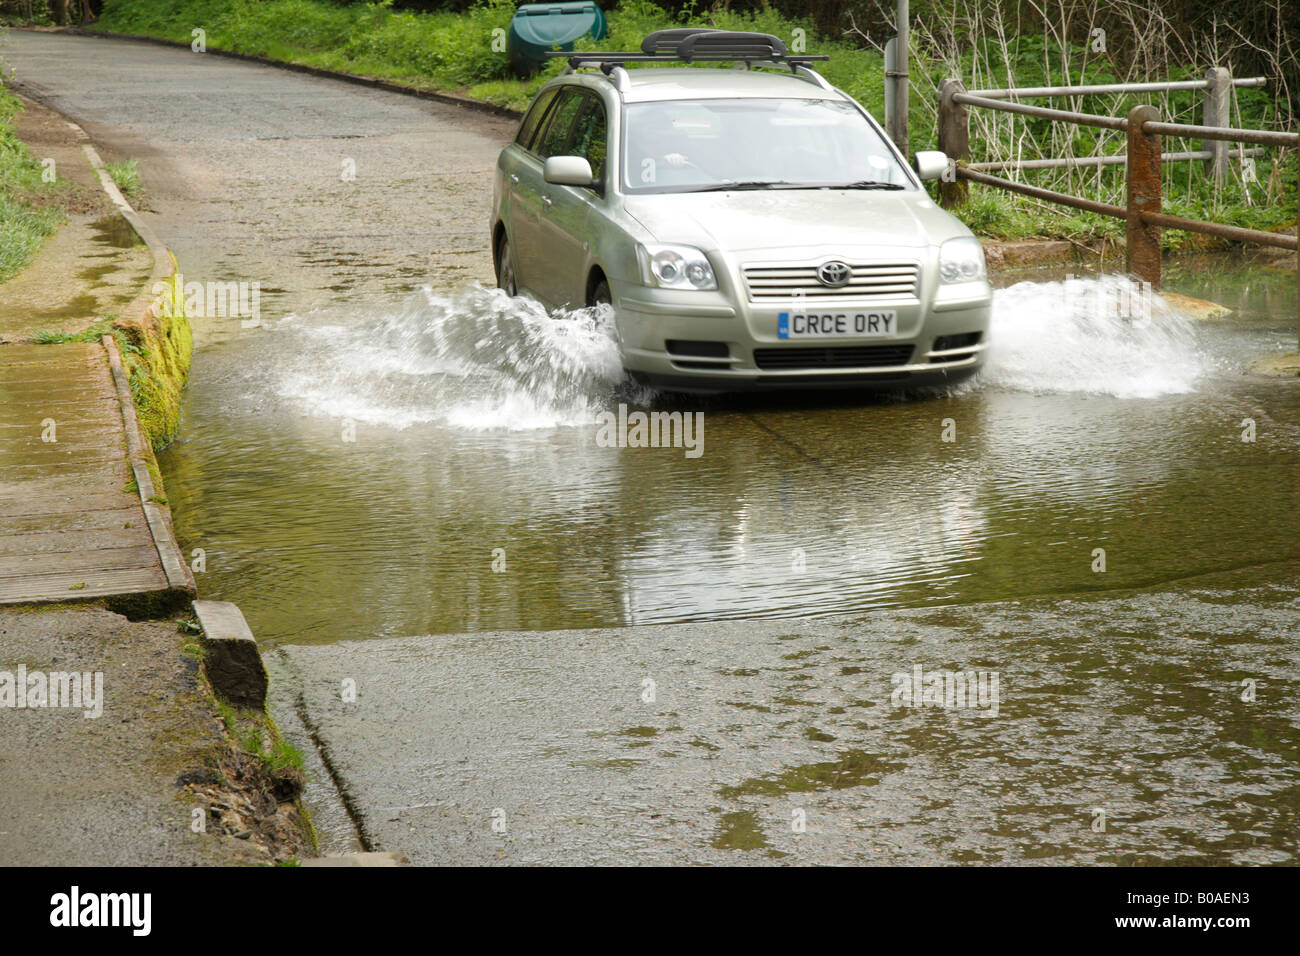 Car driving through a ford with water splashing from the wheels Stock Photo